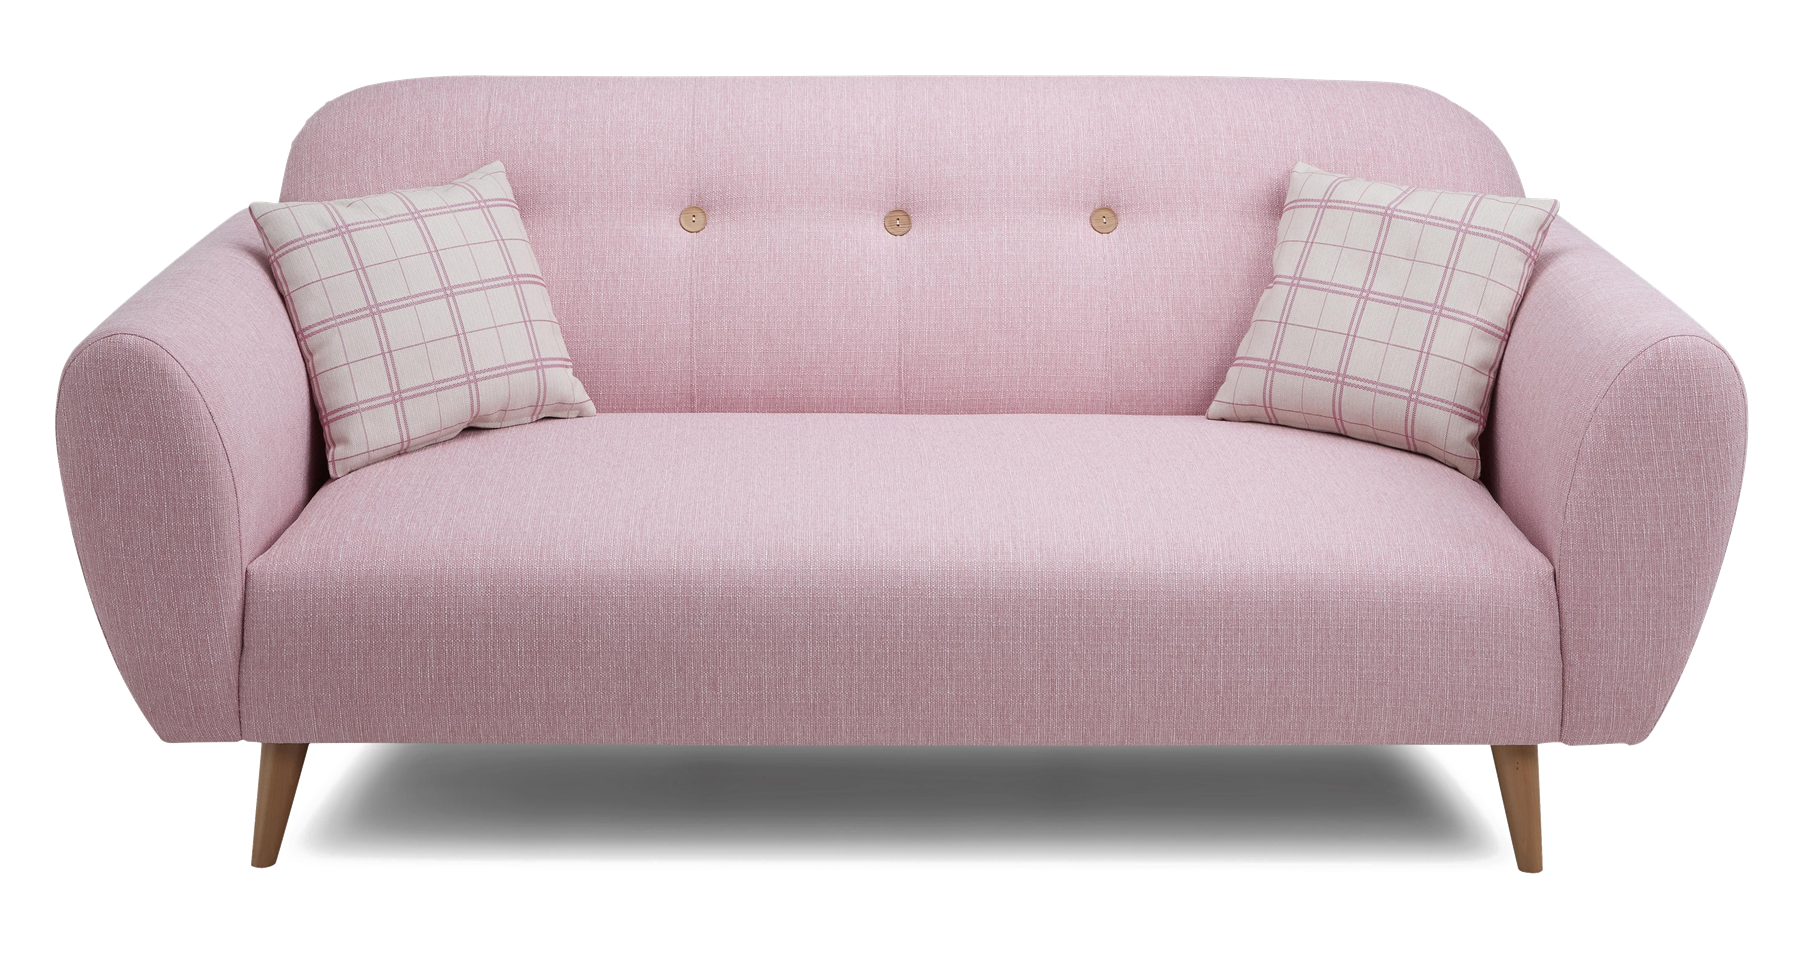 Sofa Bed Image Free Download PNG HQ PNG Image